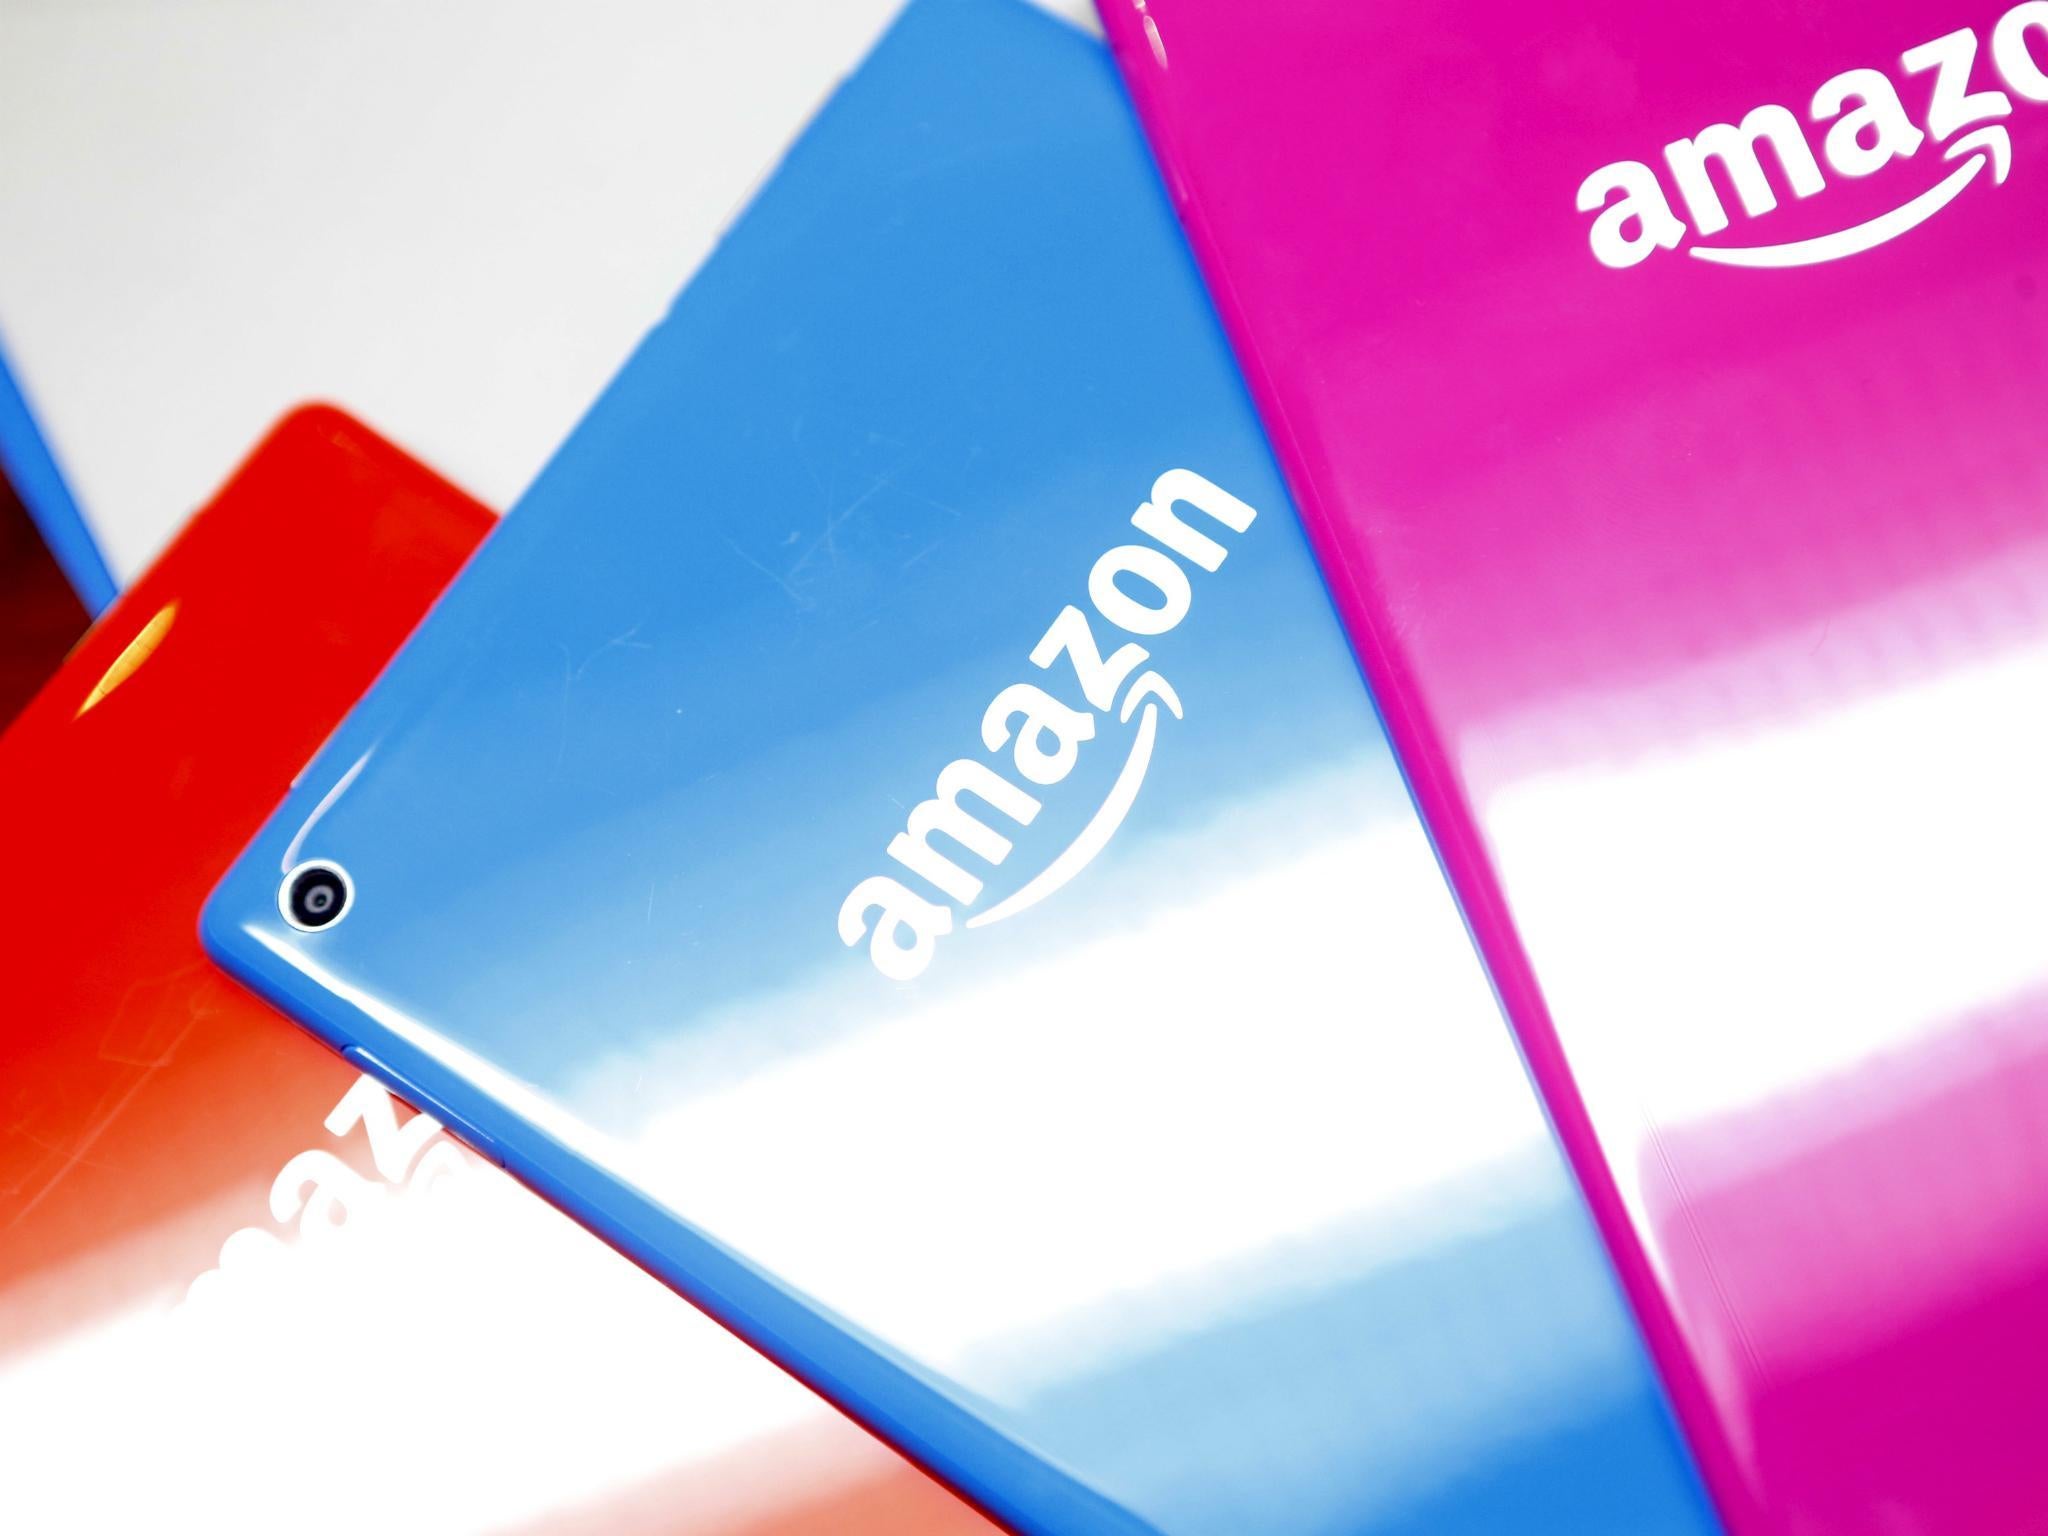 Amazon had offered to refund users with gift cards, but the proposal was rejected